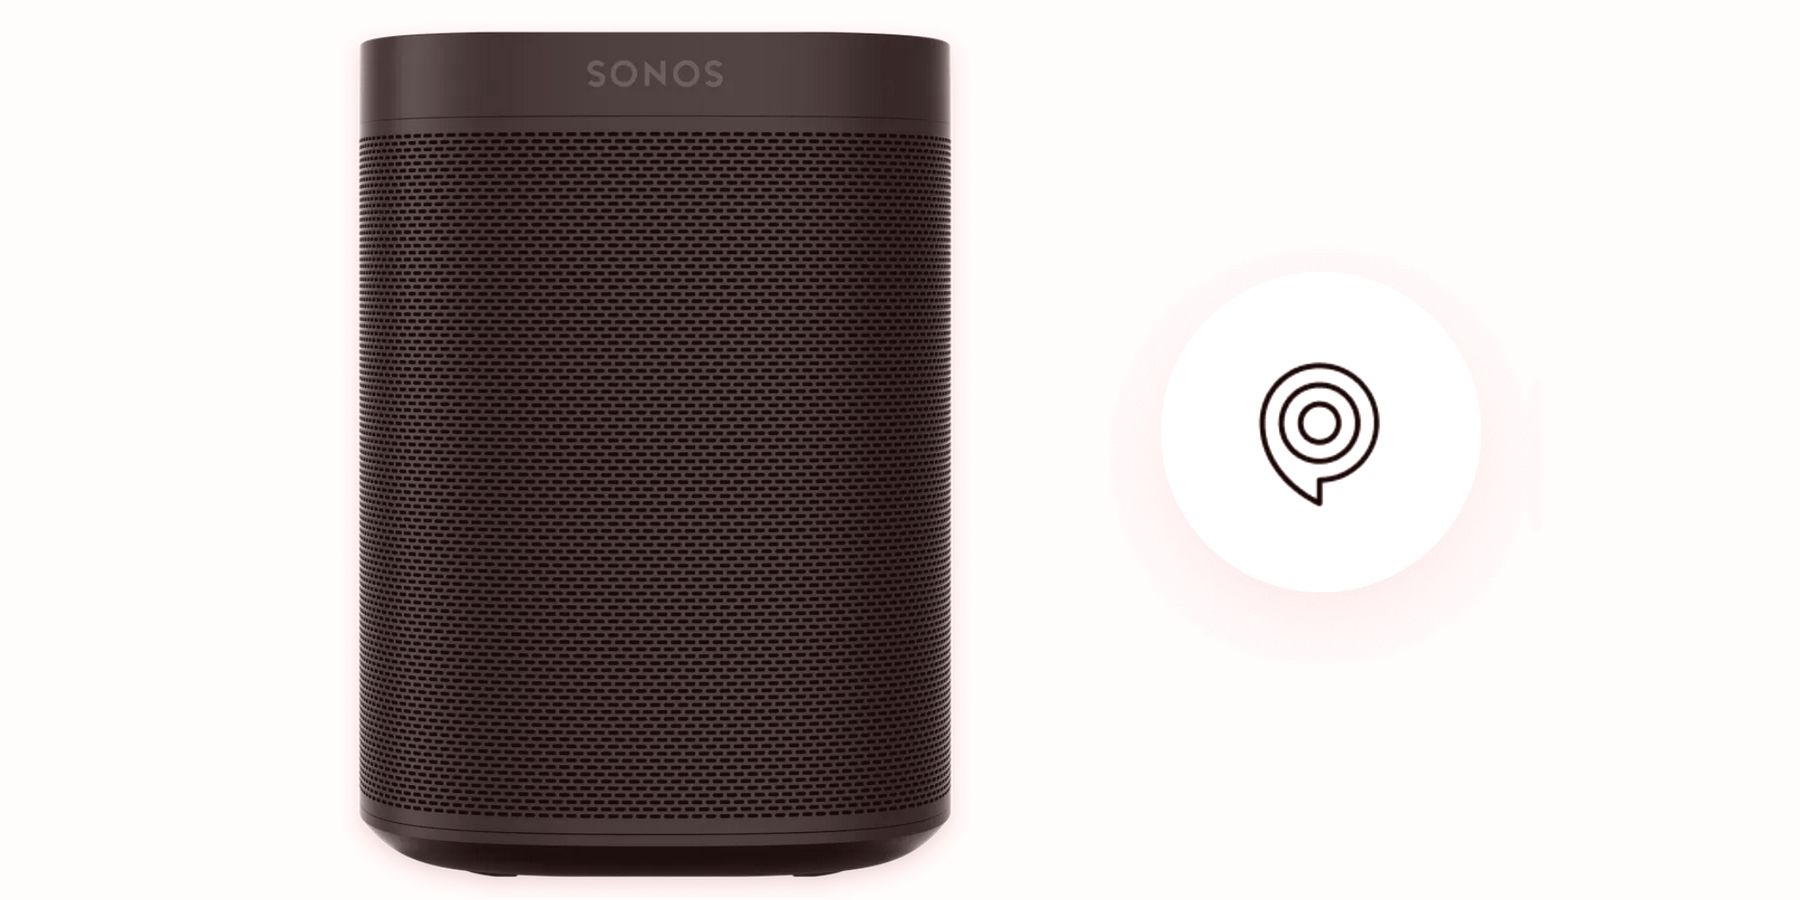 Sonos might be working on its own smart assistant